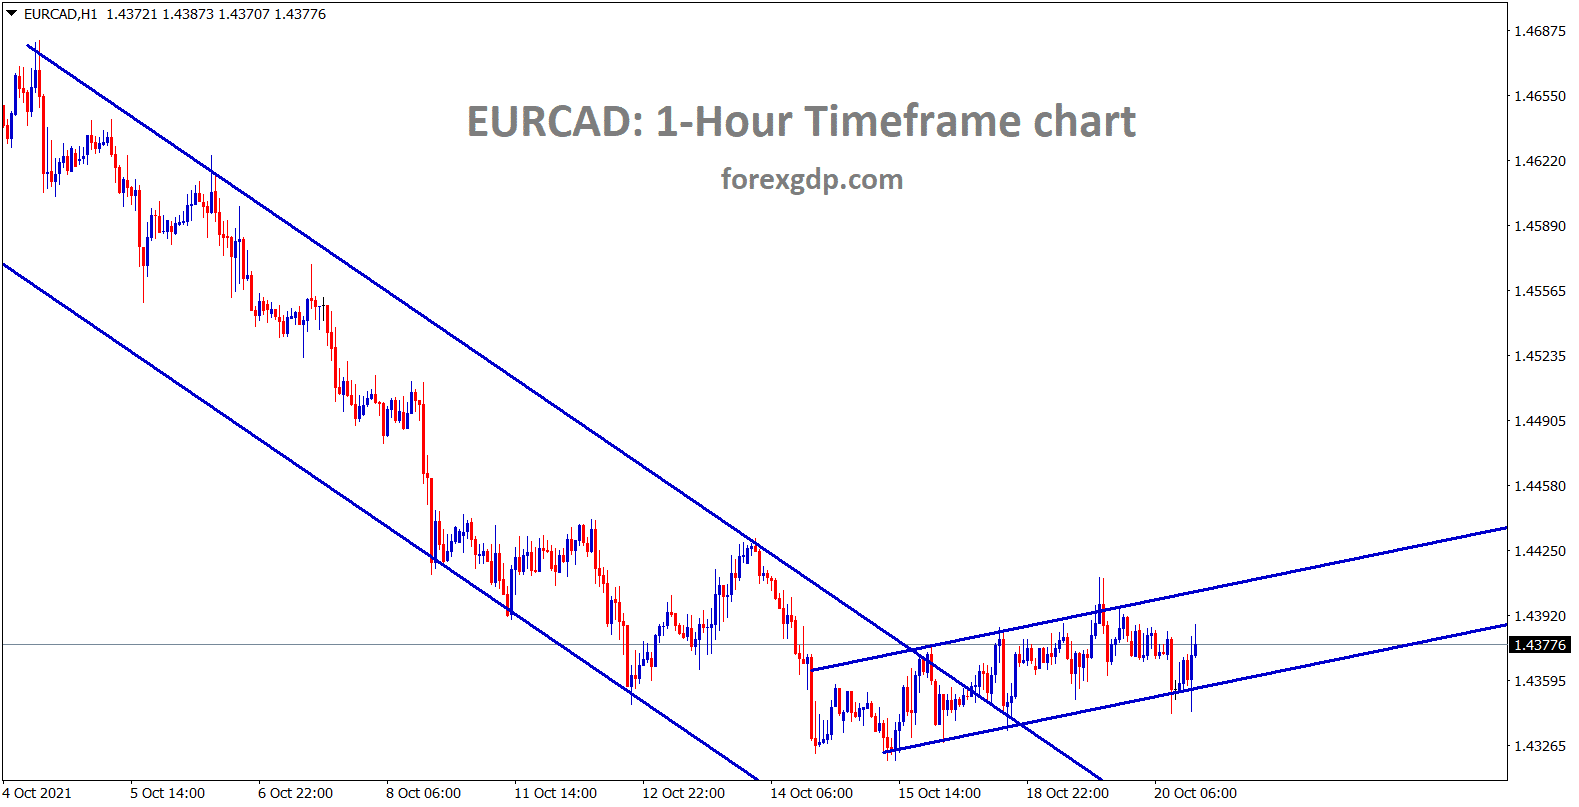 EURCAD is moving in a minor ascending channel line